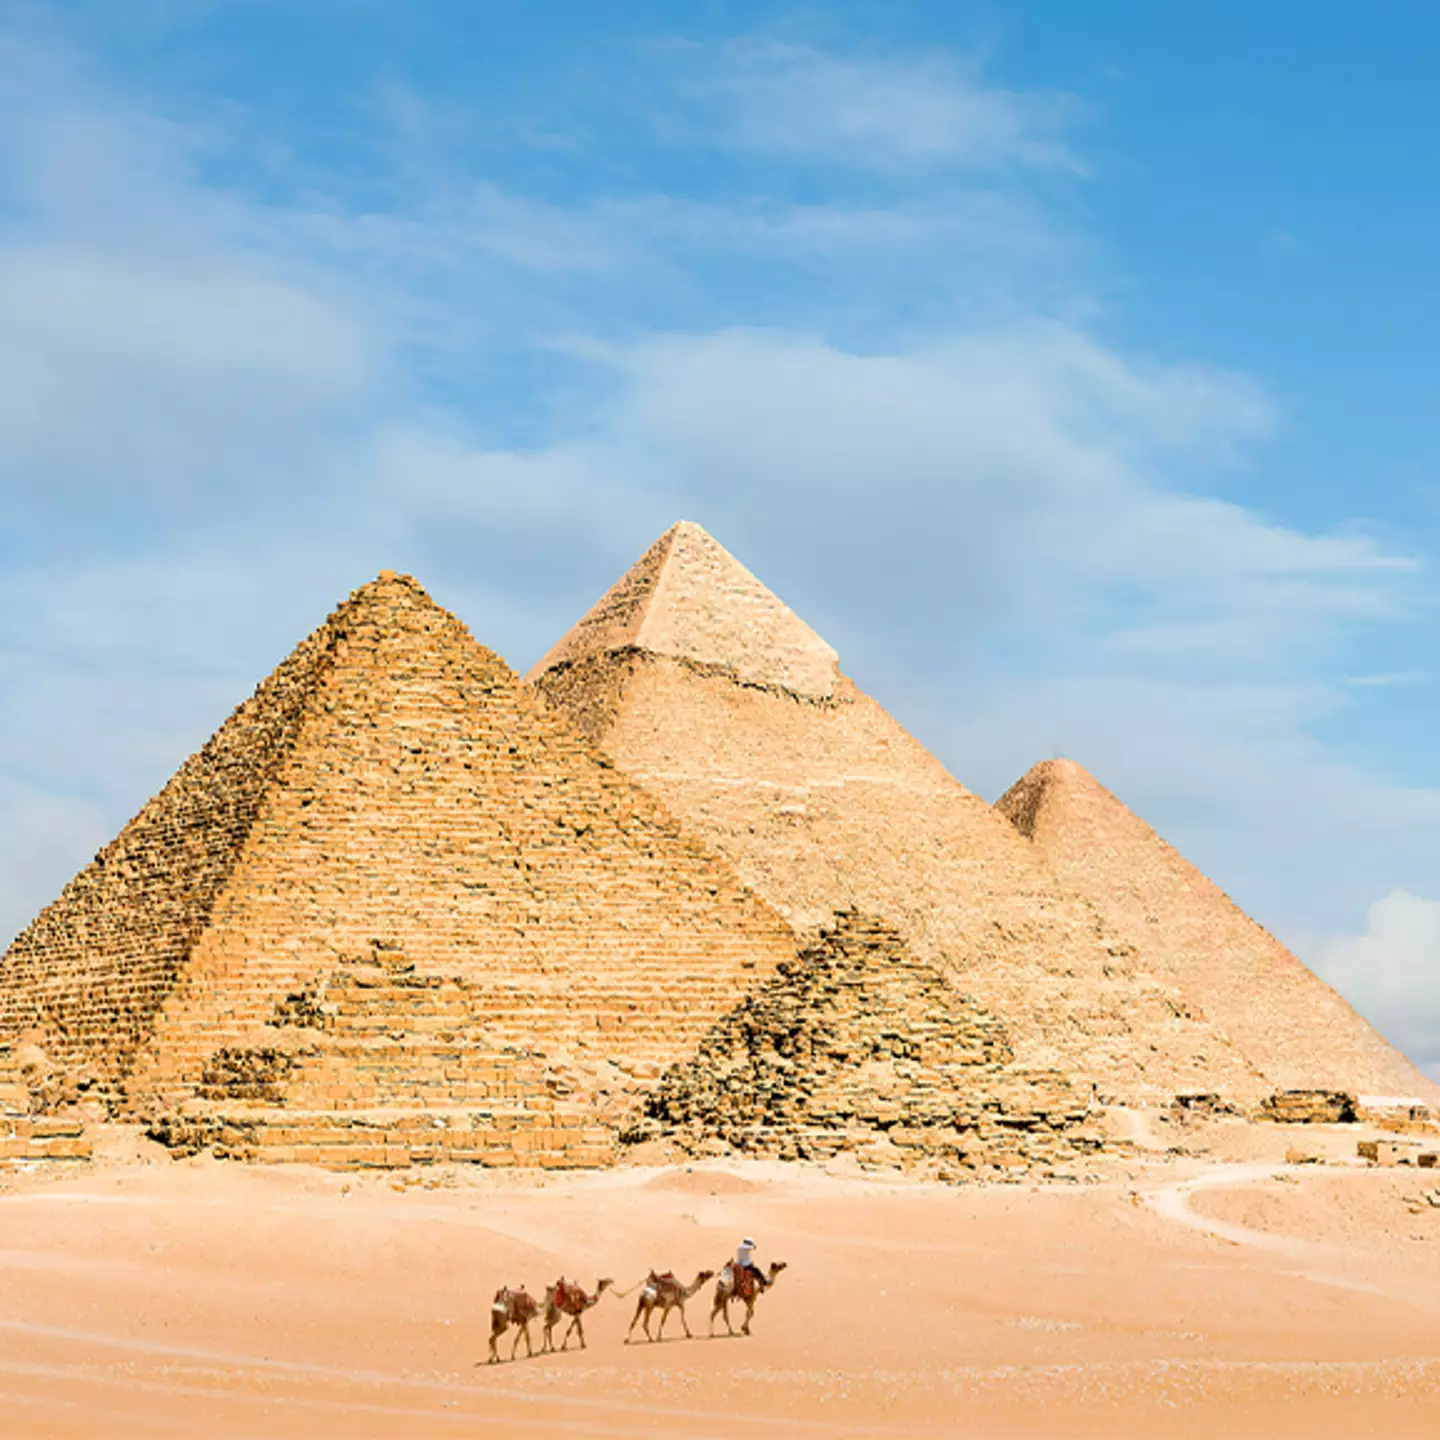 ‘World’s oldest pyramid' built 25,000 years ago was not made by humans, archaeologists claim